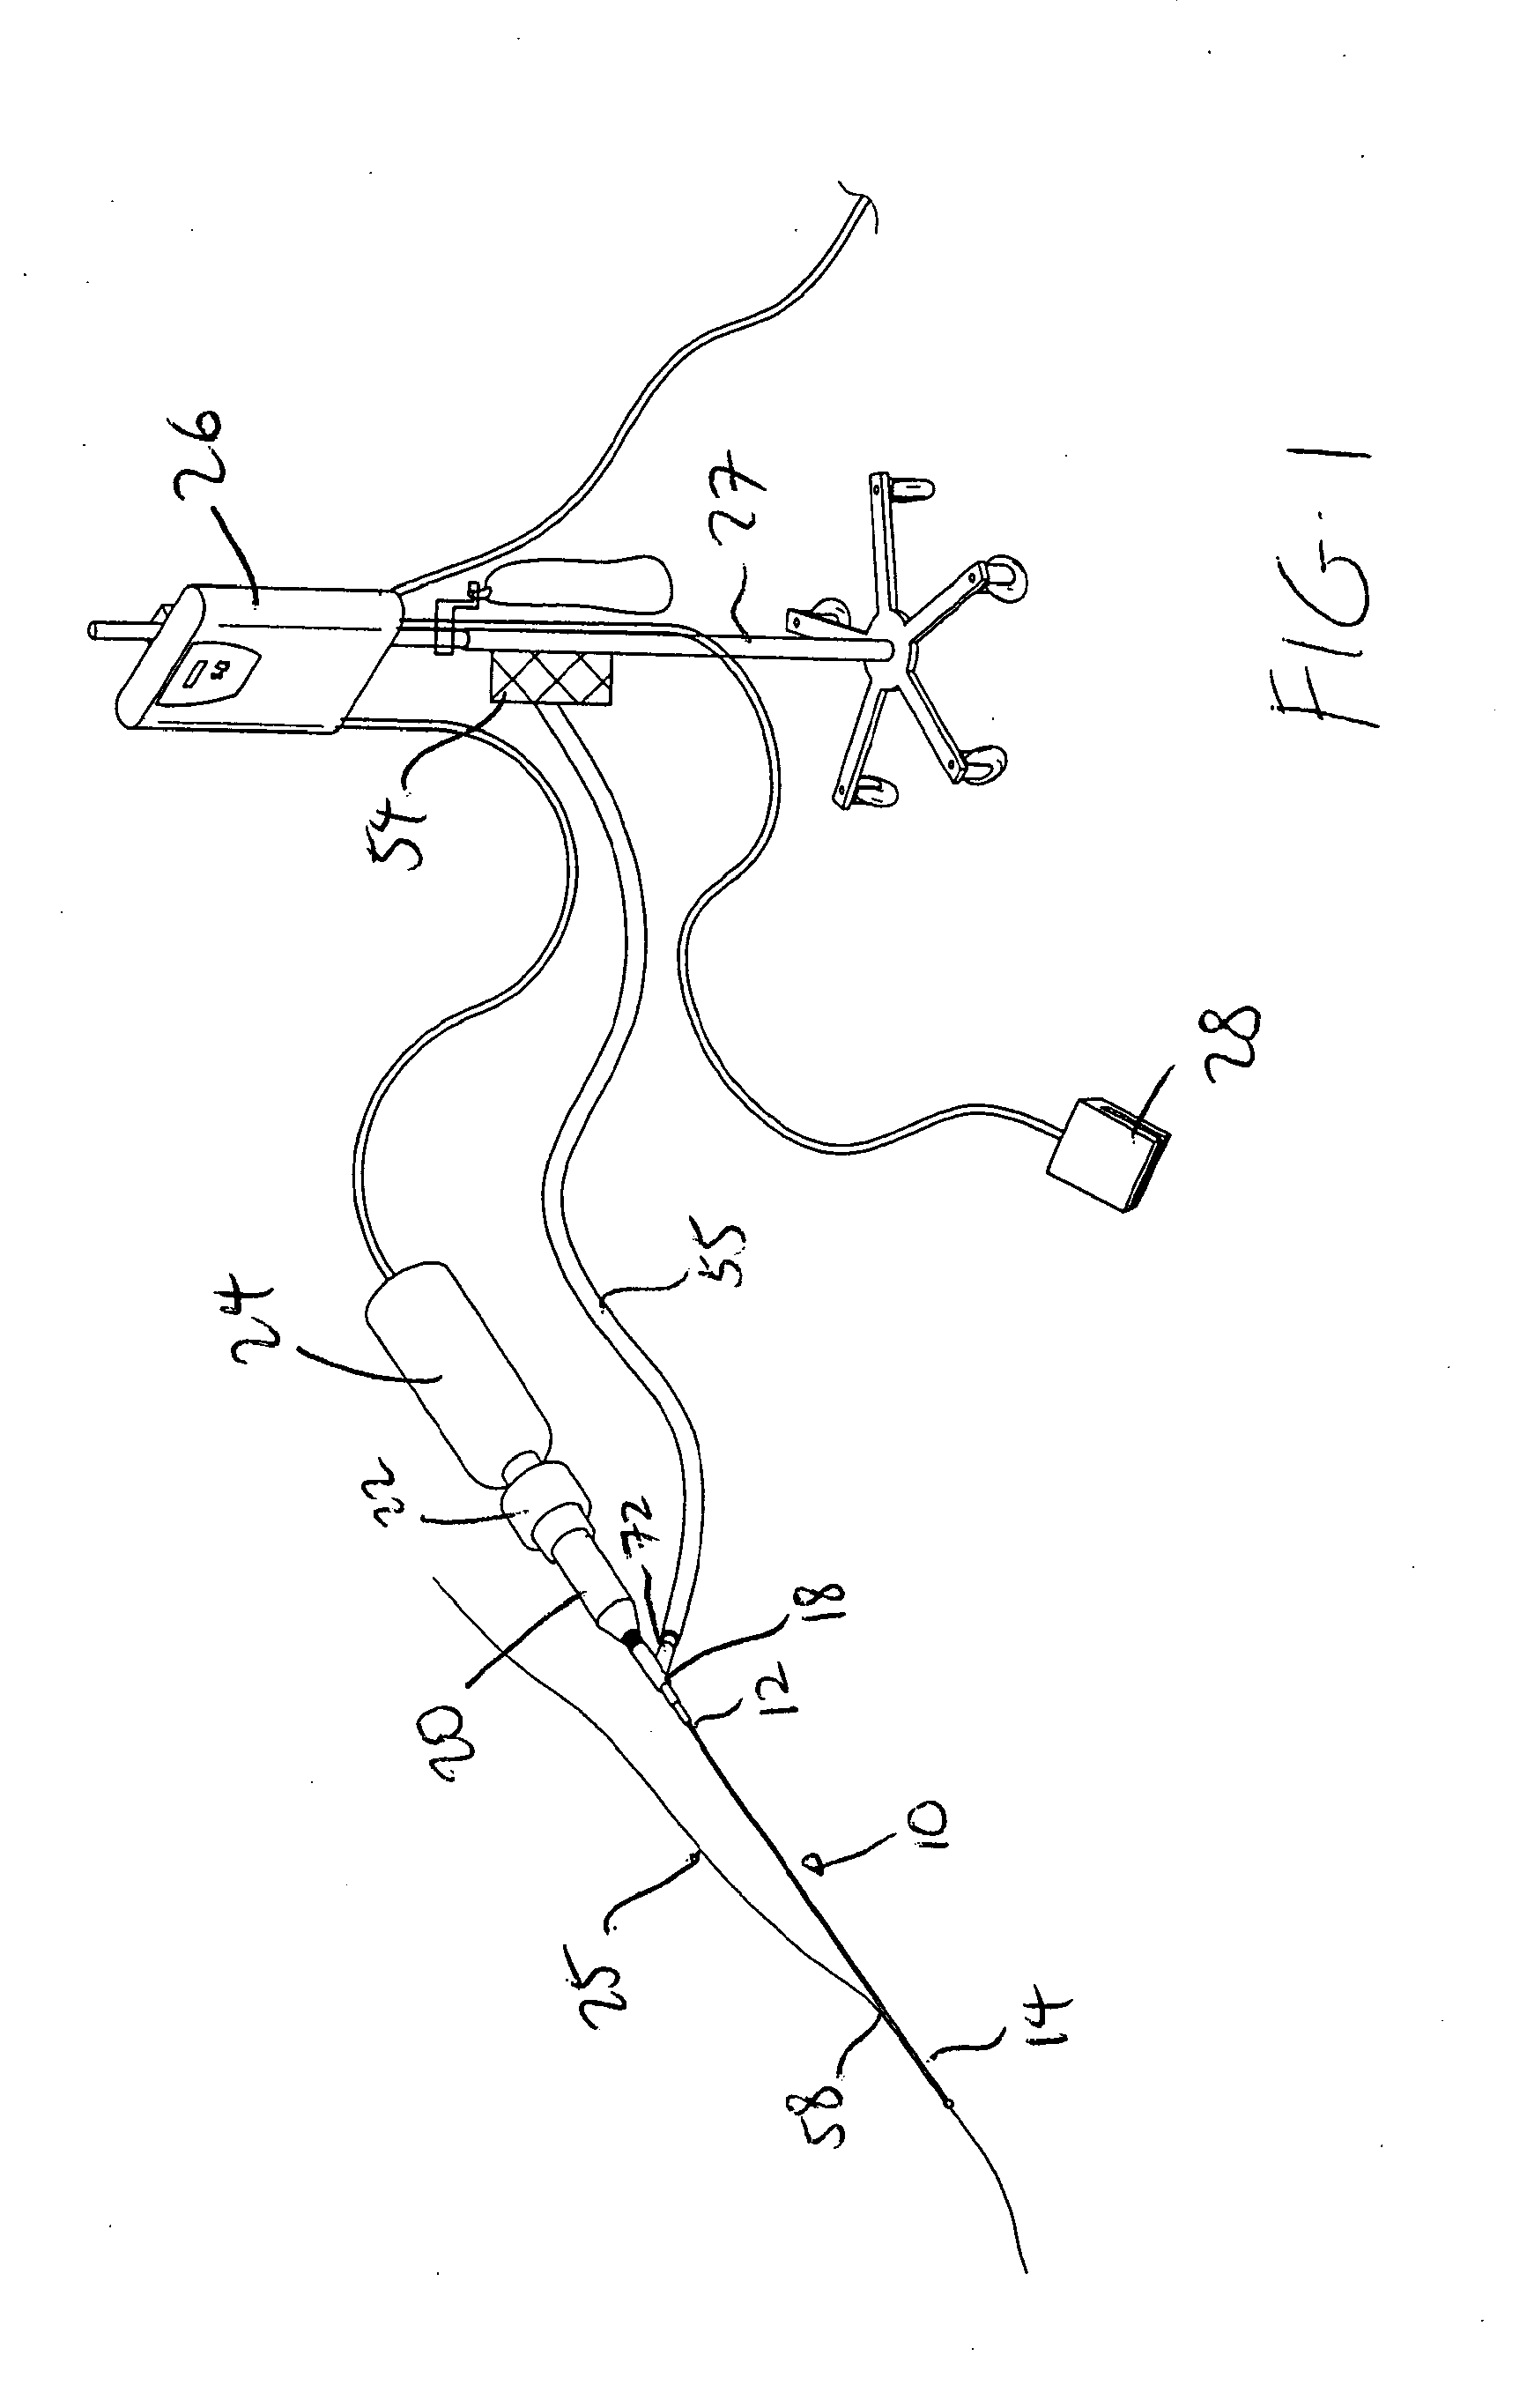 Ultrasound Catheter Having Protective Feature Against Breakage